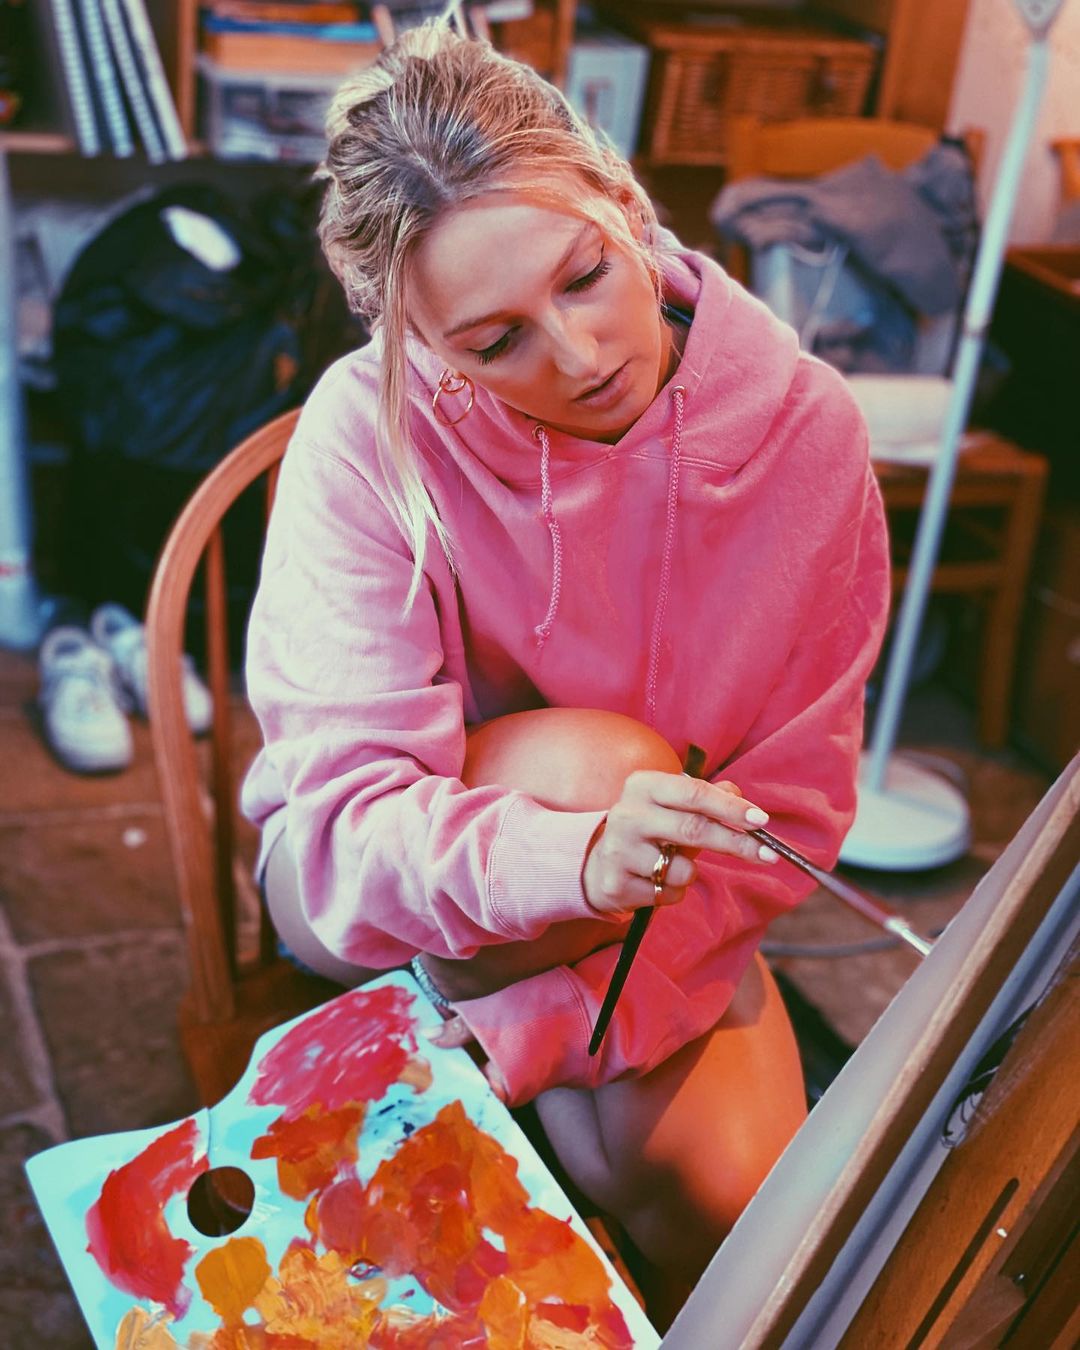 Georgia Hirst loves to paint and Sketch her days away. She is wearing a pink jumper and using a brush on a canvas